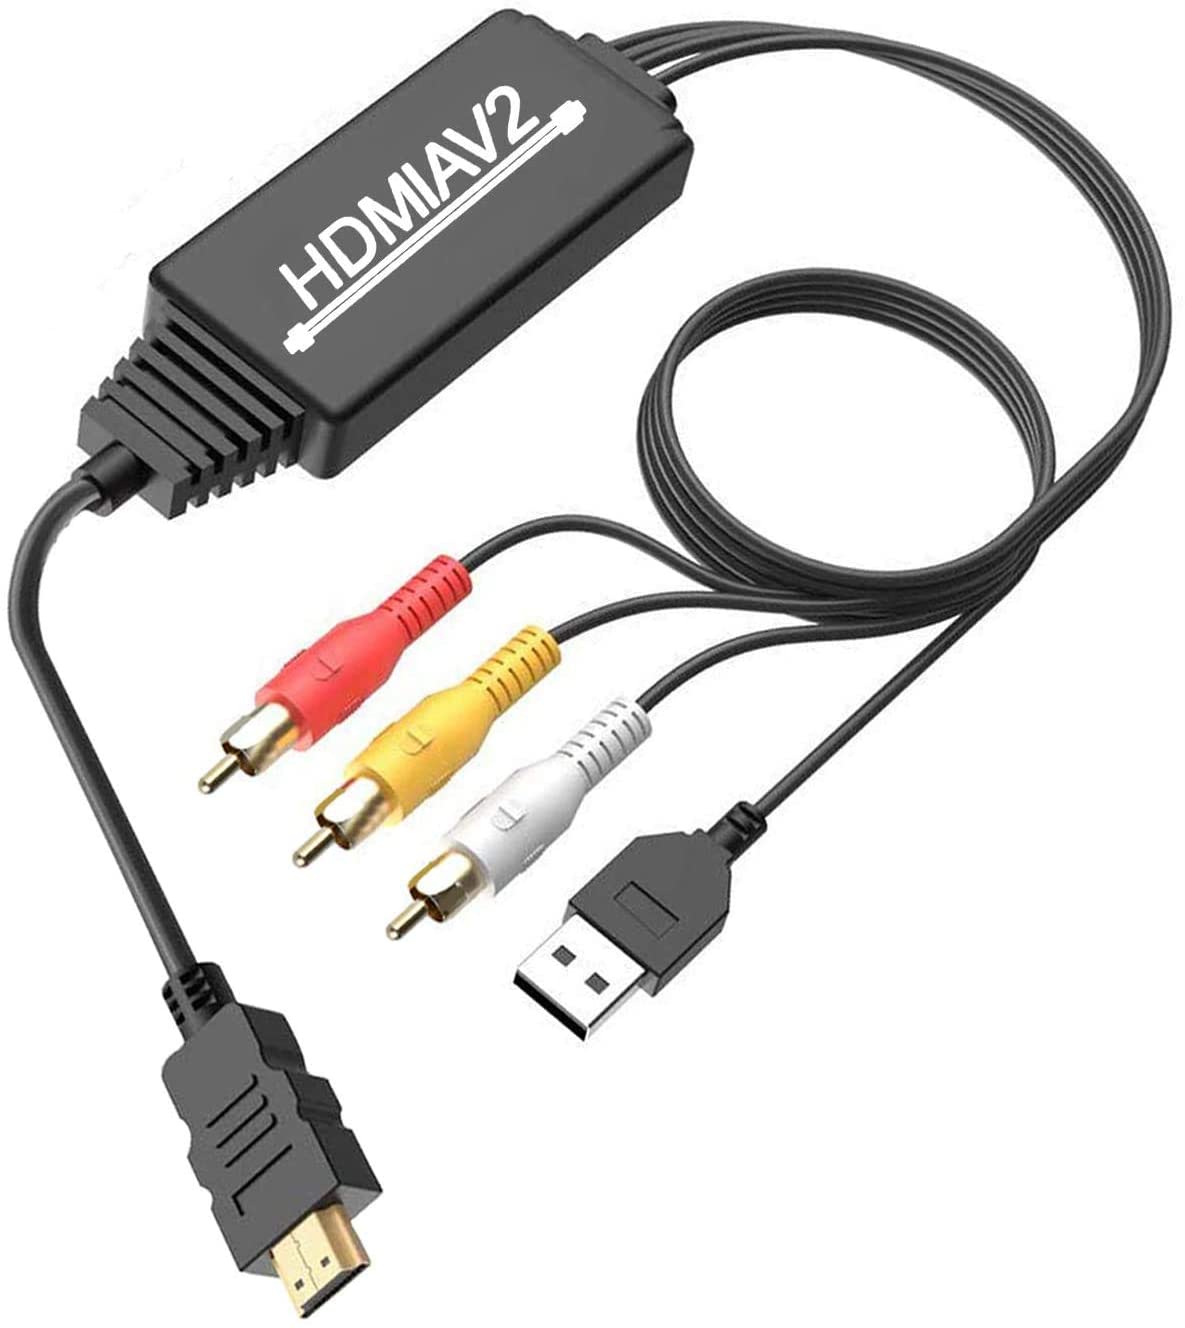 angivet Rationel violinist DIGITNOW! HDMI to RCA Converter, HDMI to RCA Cable Adapter, 1080P HDMI